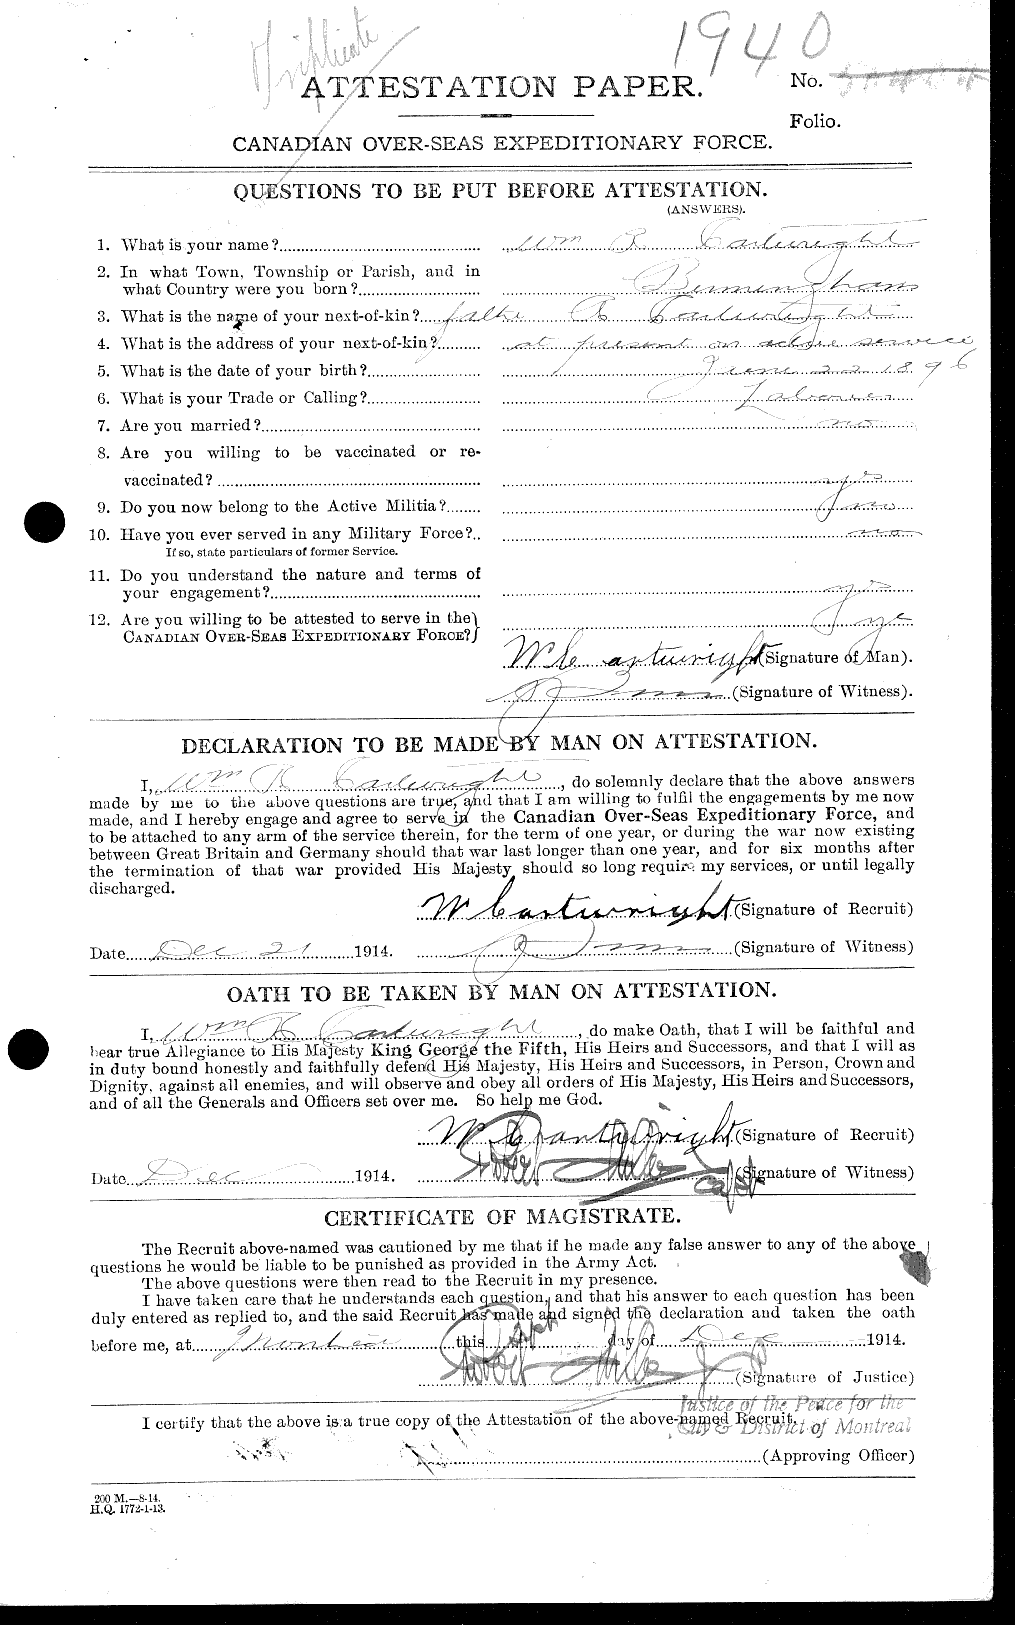 Personnel Records of the First World War - CEF 012555a